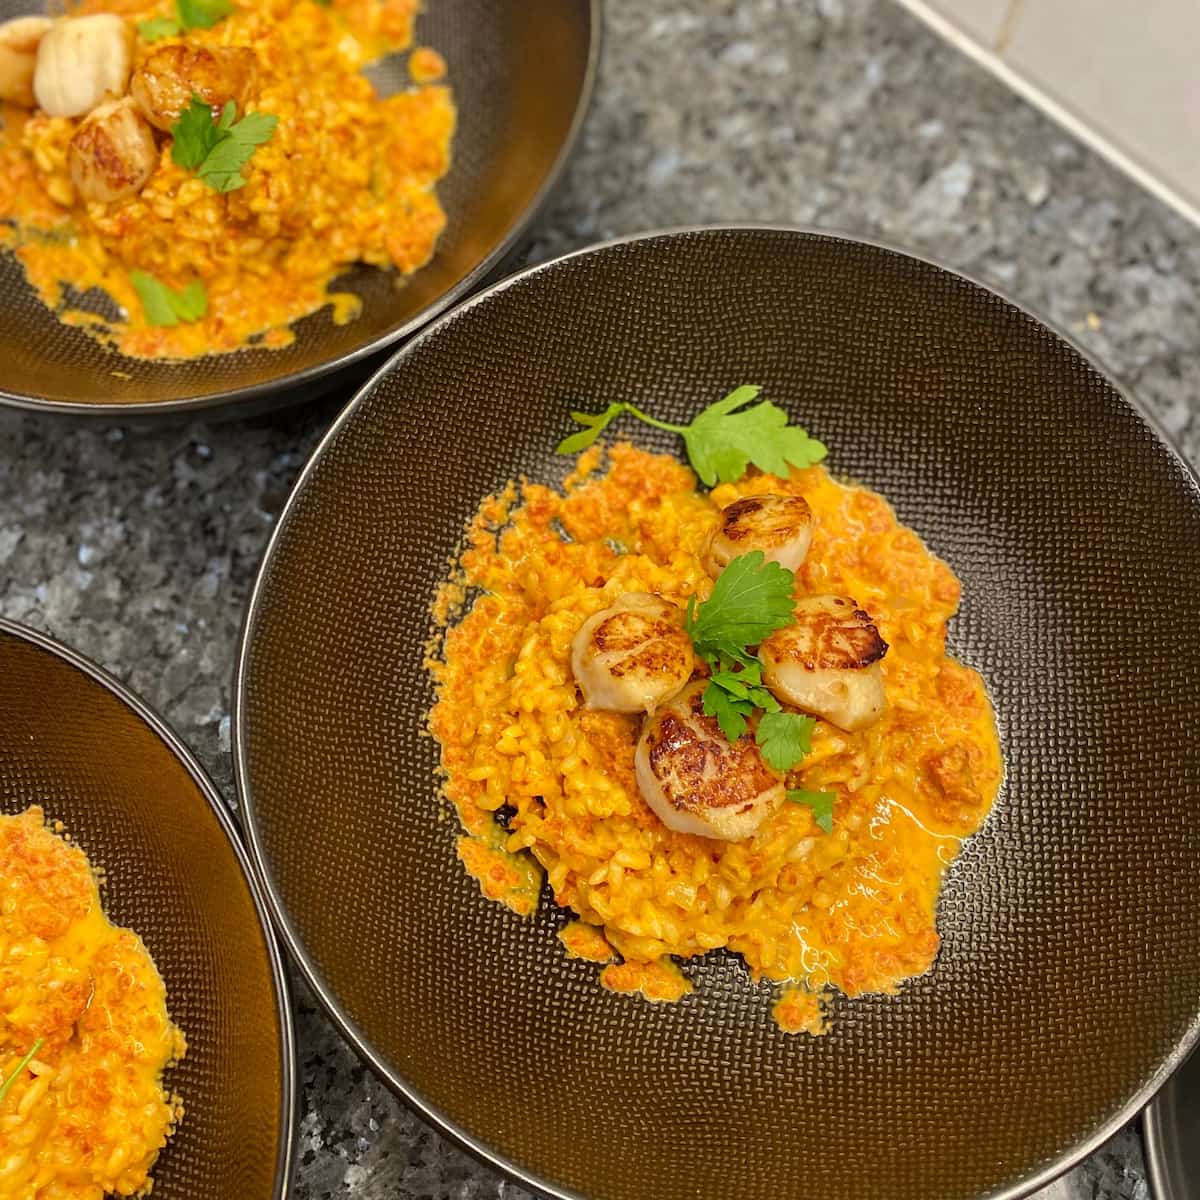 3 black giant bowls of creamy orange-coloured spicy risotto